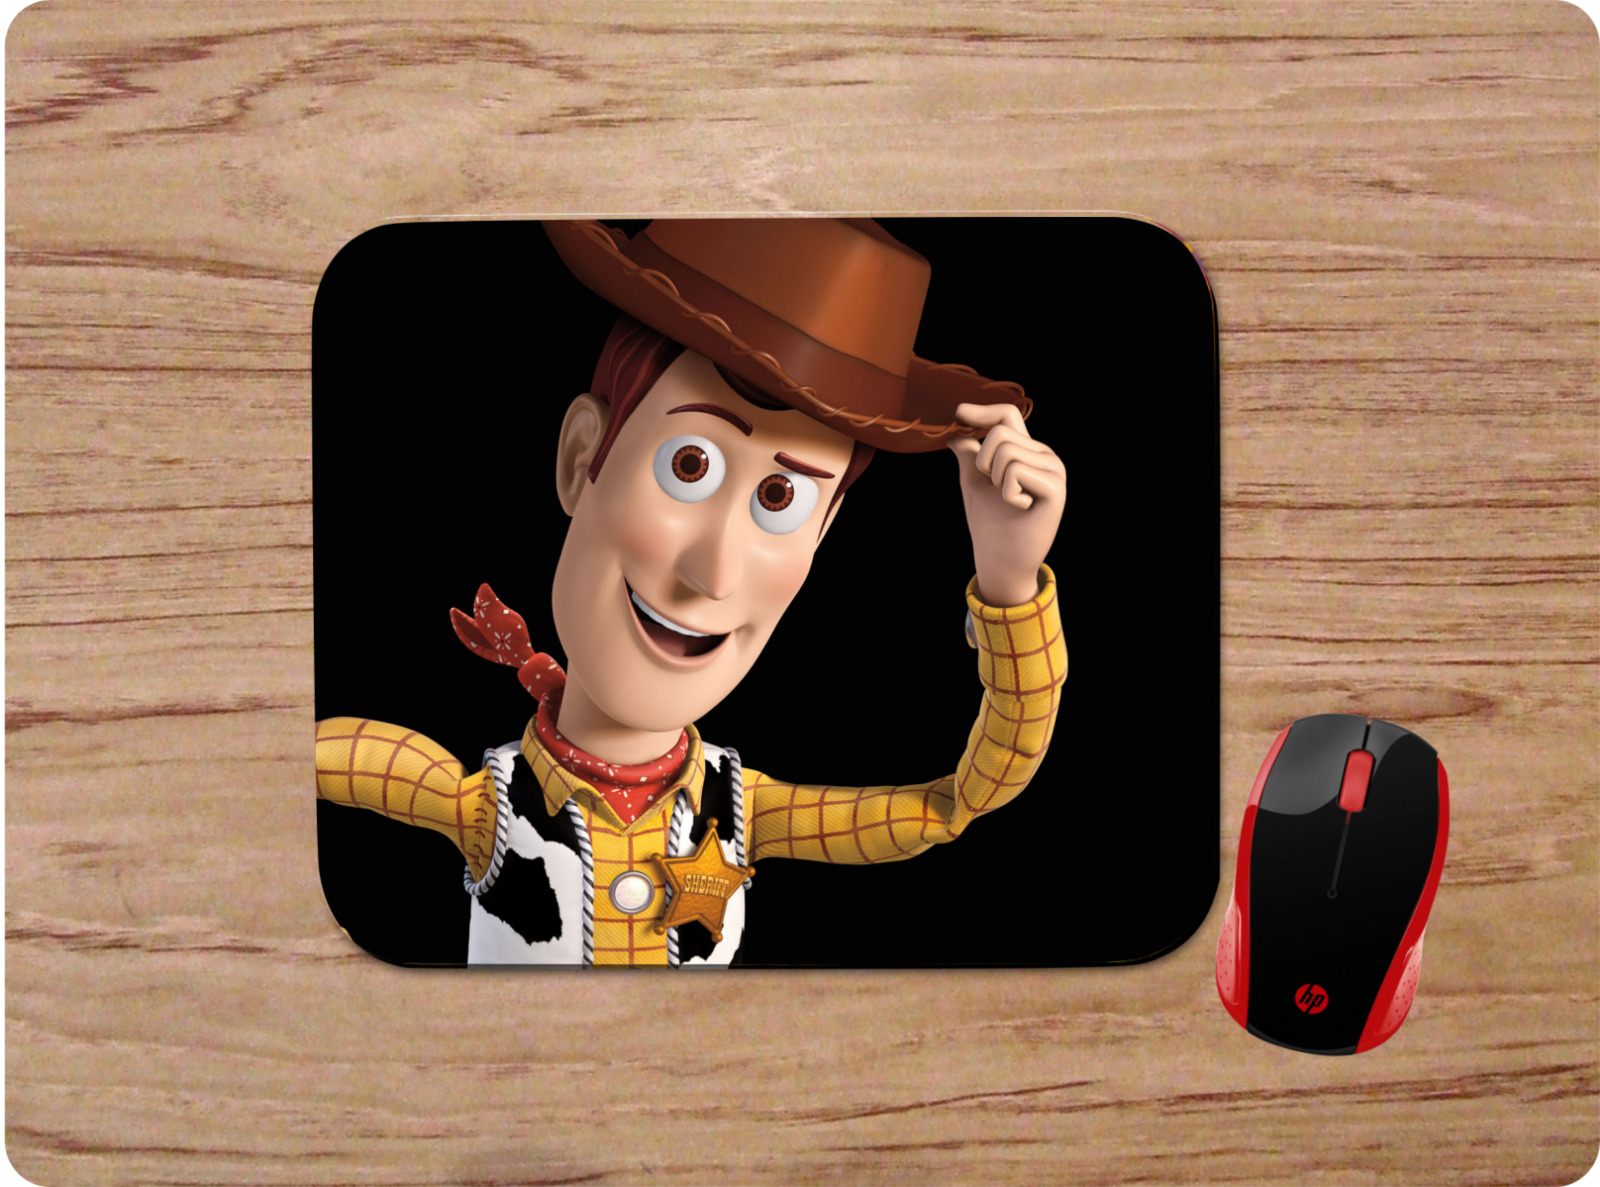 TOY STORY WOODY CUSTOM NON-SLIP NEOPRENE MOUSE PAD HOT GIFT HOME OFFICE CLASSIC